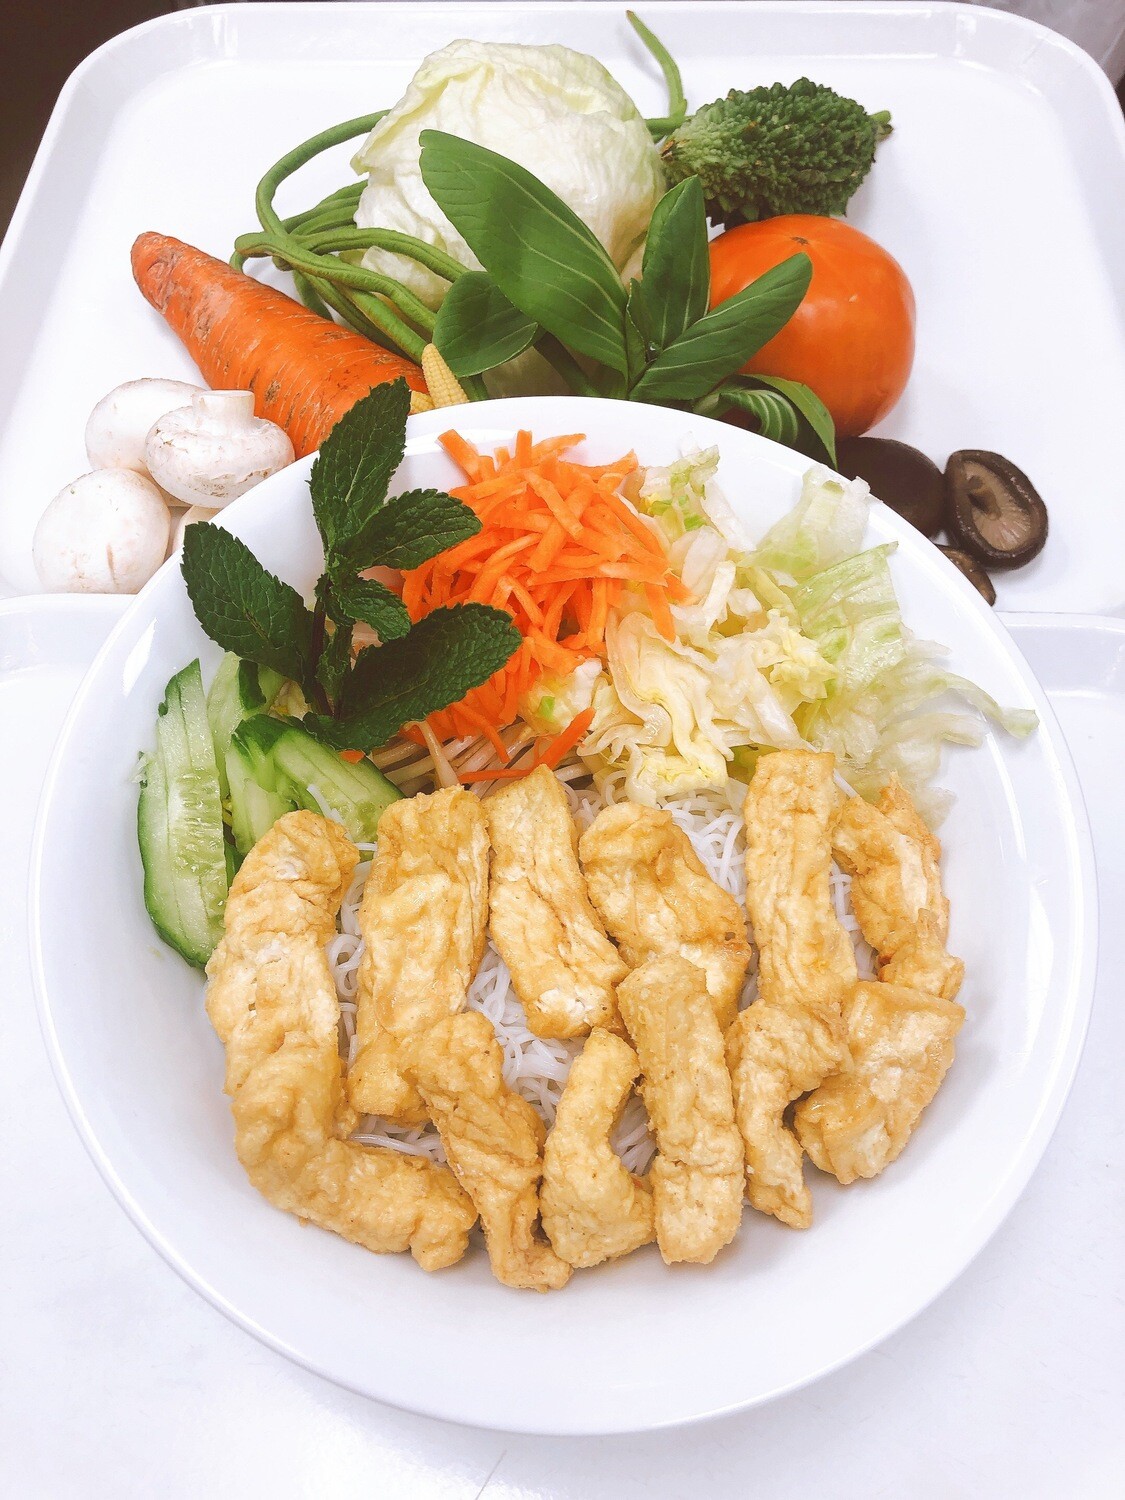 616- Vermicelli with Vegetable and Fried Tofu